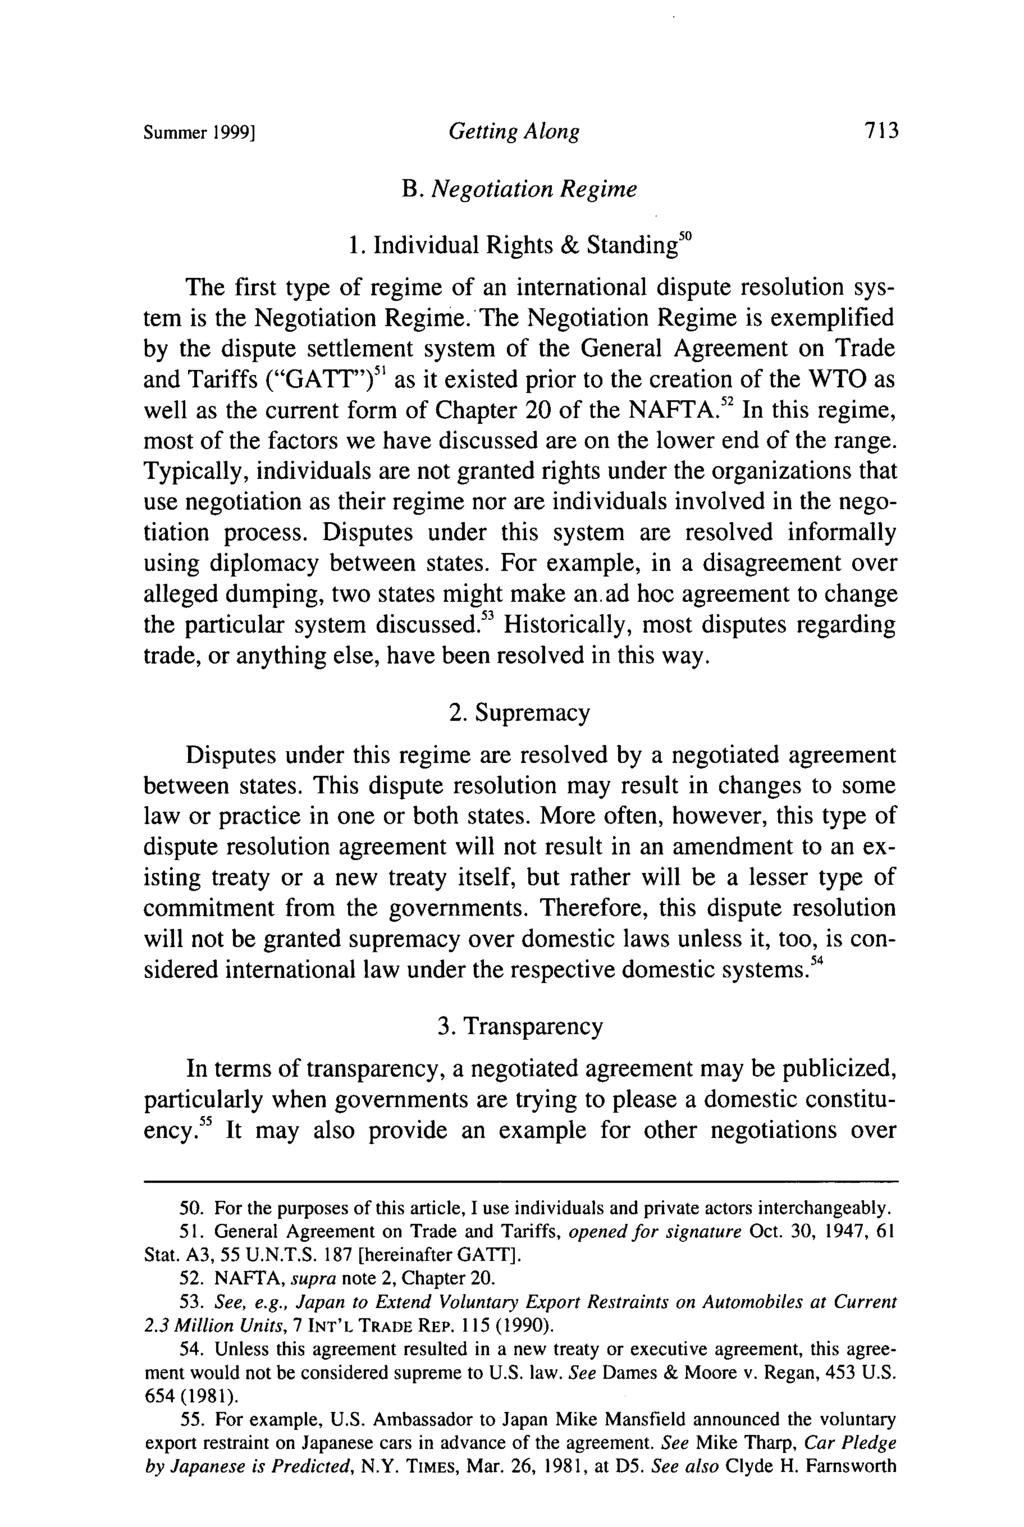 Summer 1999] Getting Along B. Negotiation Regime 1. Individual Rights & Standing" The first type of regime of an international dispute resolution system is the Negotiation Regime.